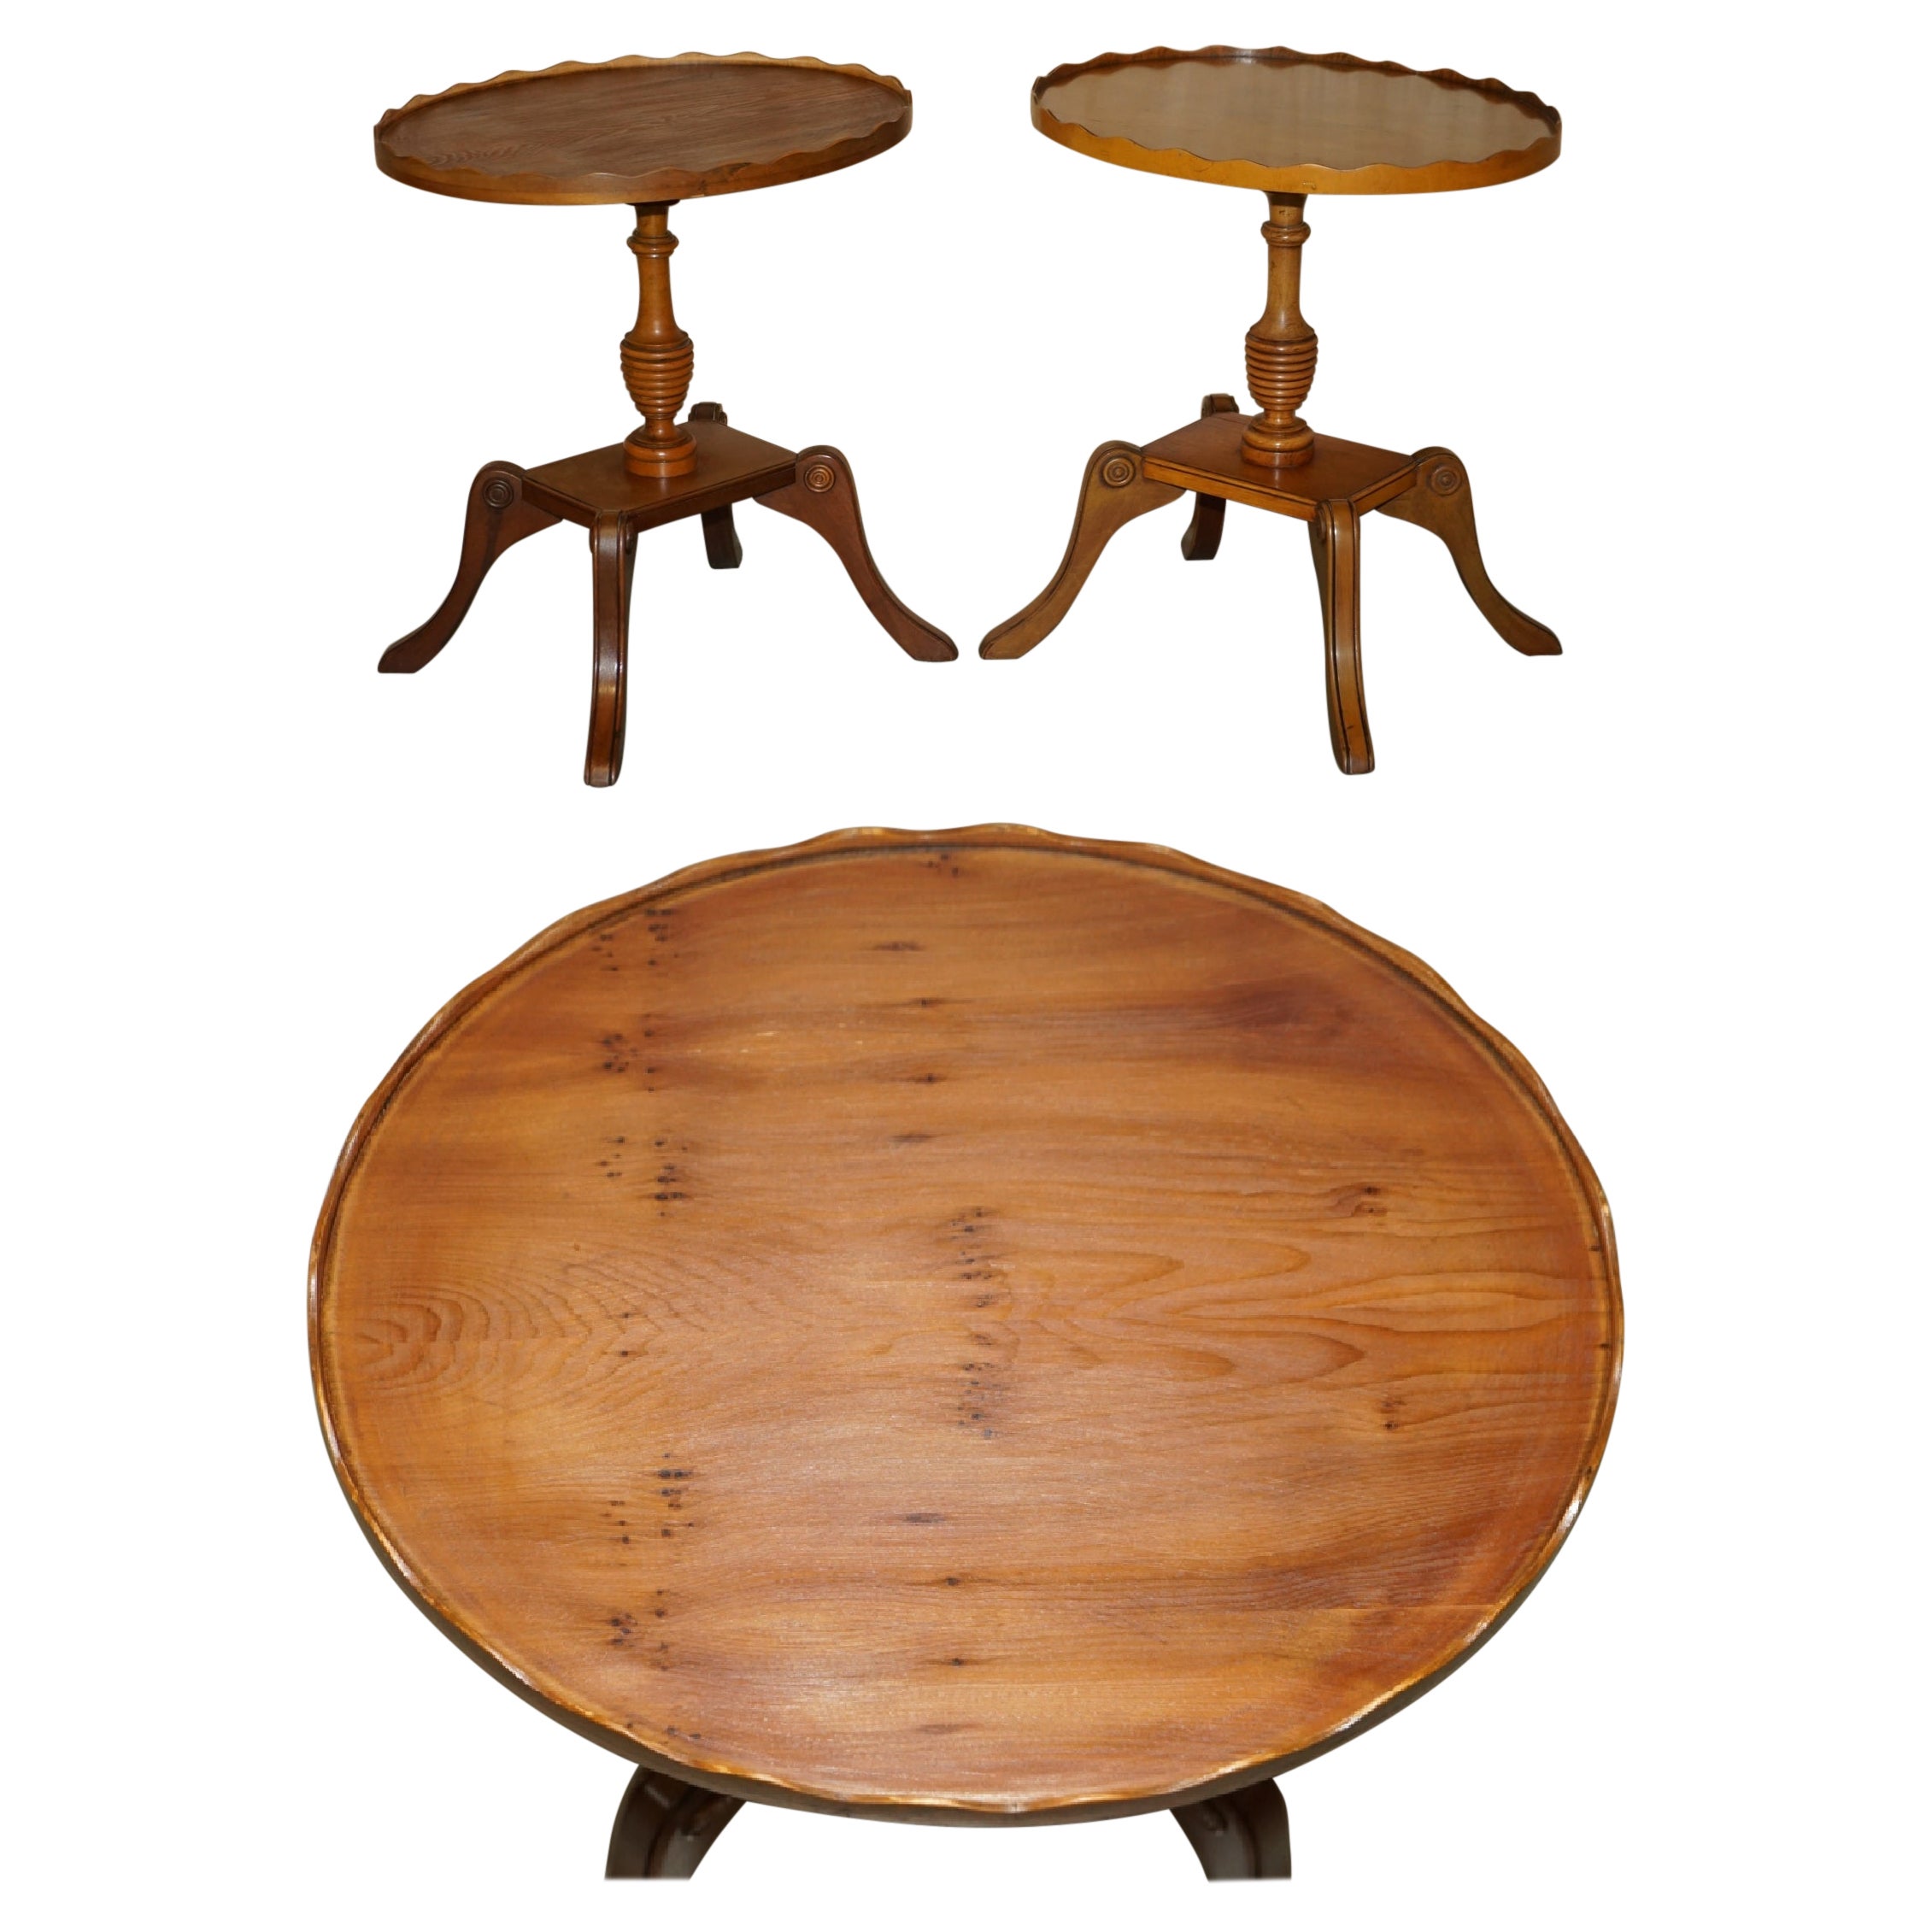 Pair of Burr Yew Wood Beresford & Hicks Side End Lamp Tables with Gallery Rail For Sale